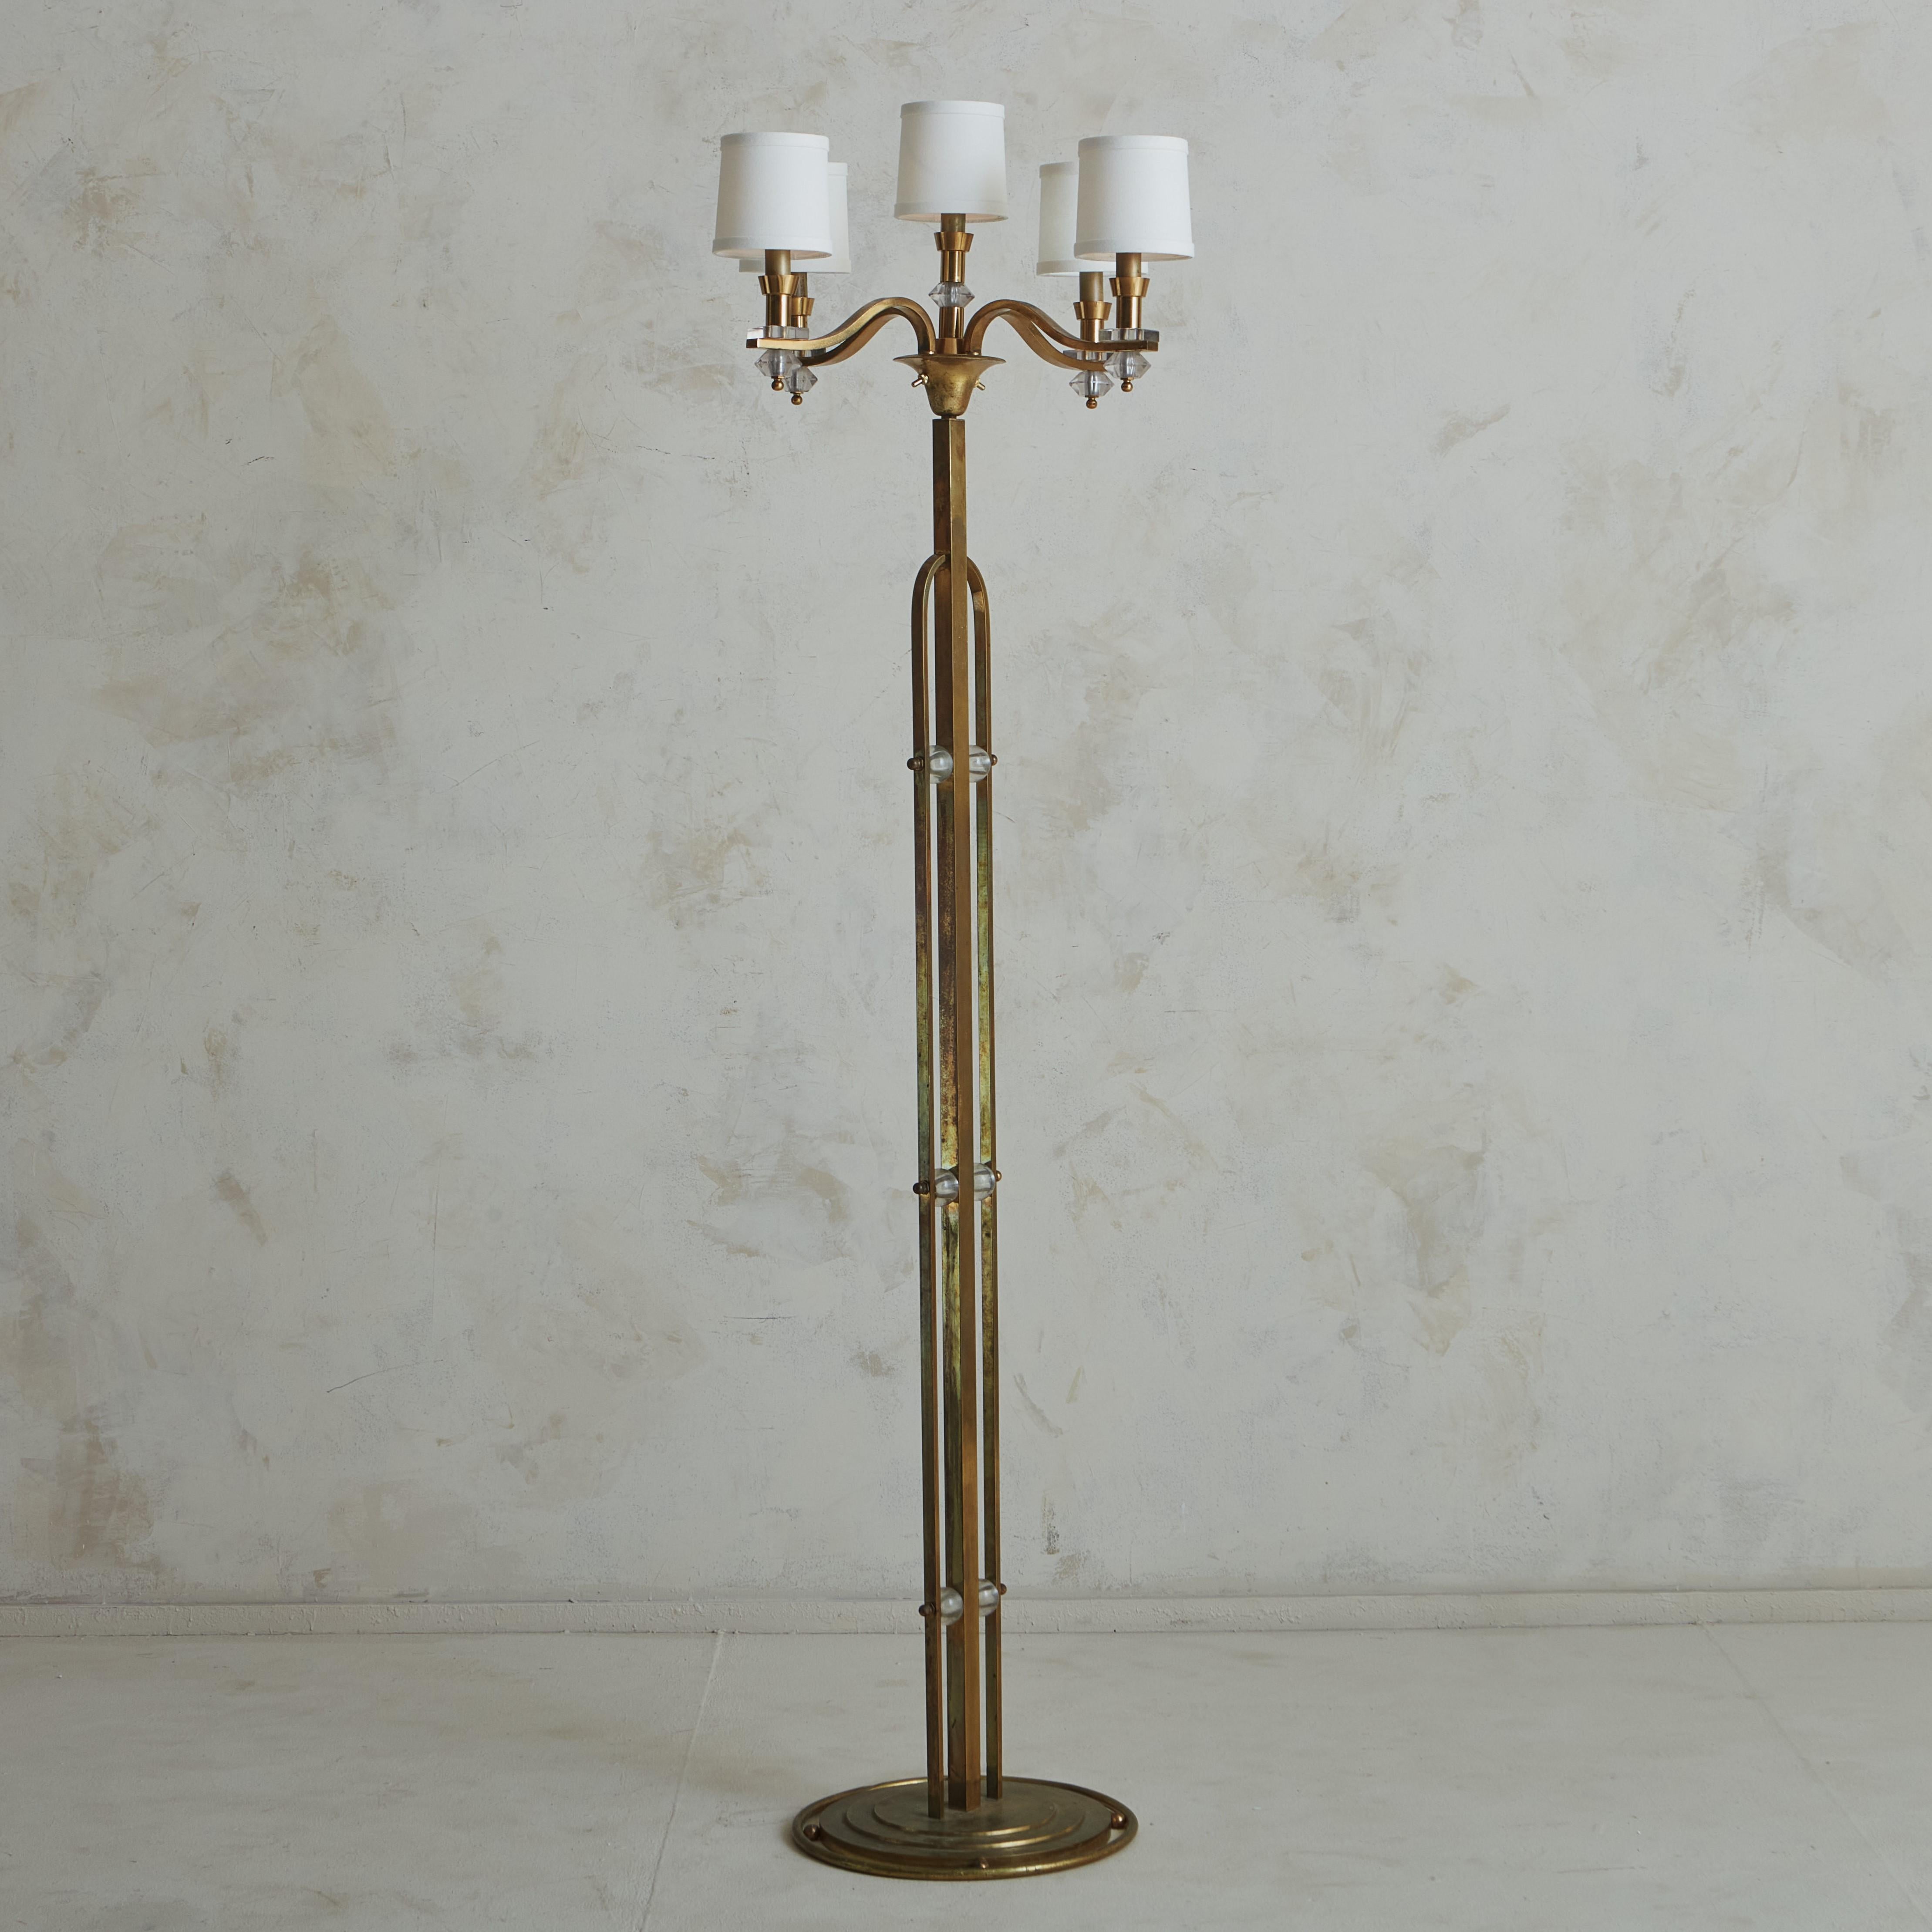 A French 1940’s floor lamp. Made by the combination of 3 materials: polished copper for the base and arms, glass for the connections and details, and textile for the 5 shades. This item, with its sturdy structure and a reinterpretation of the